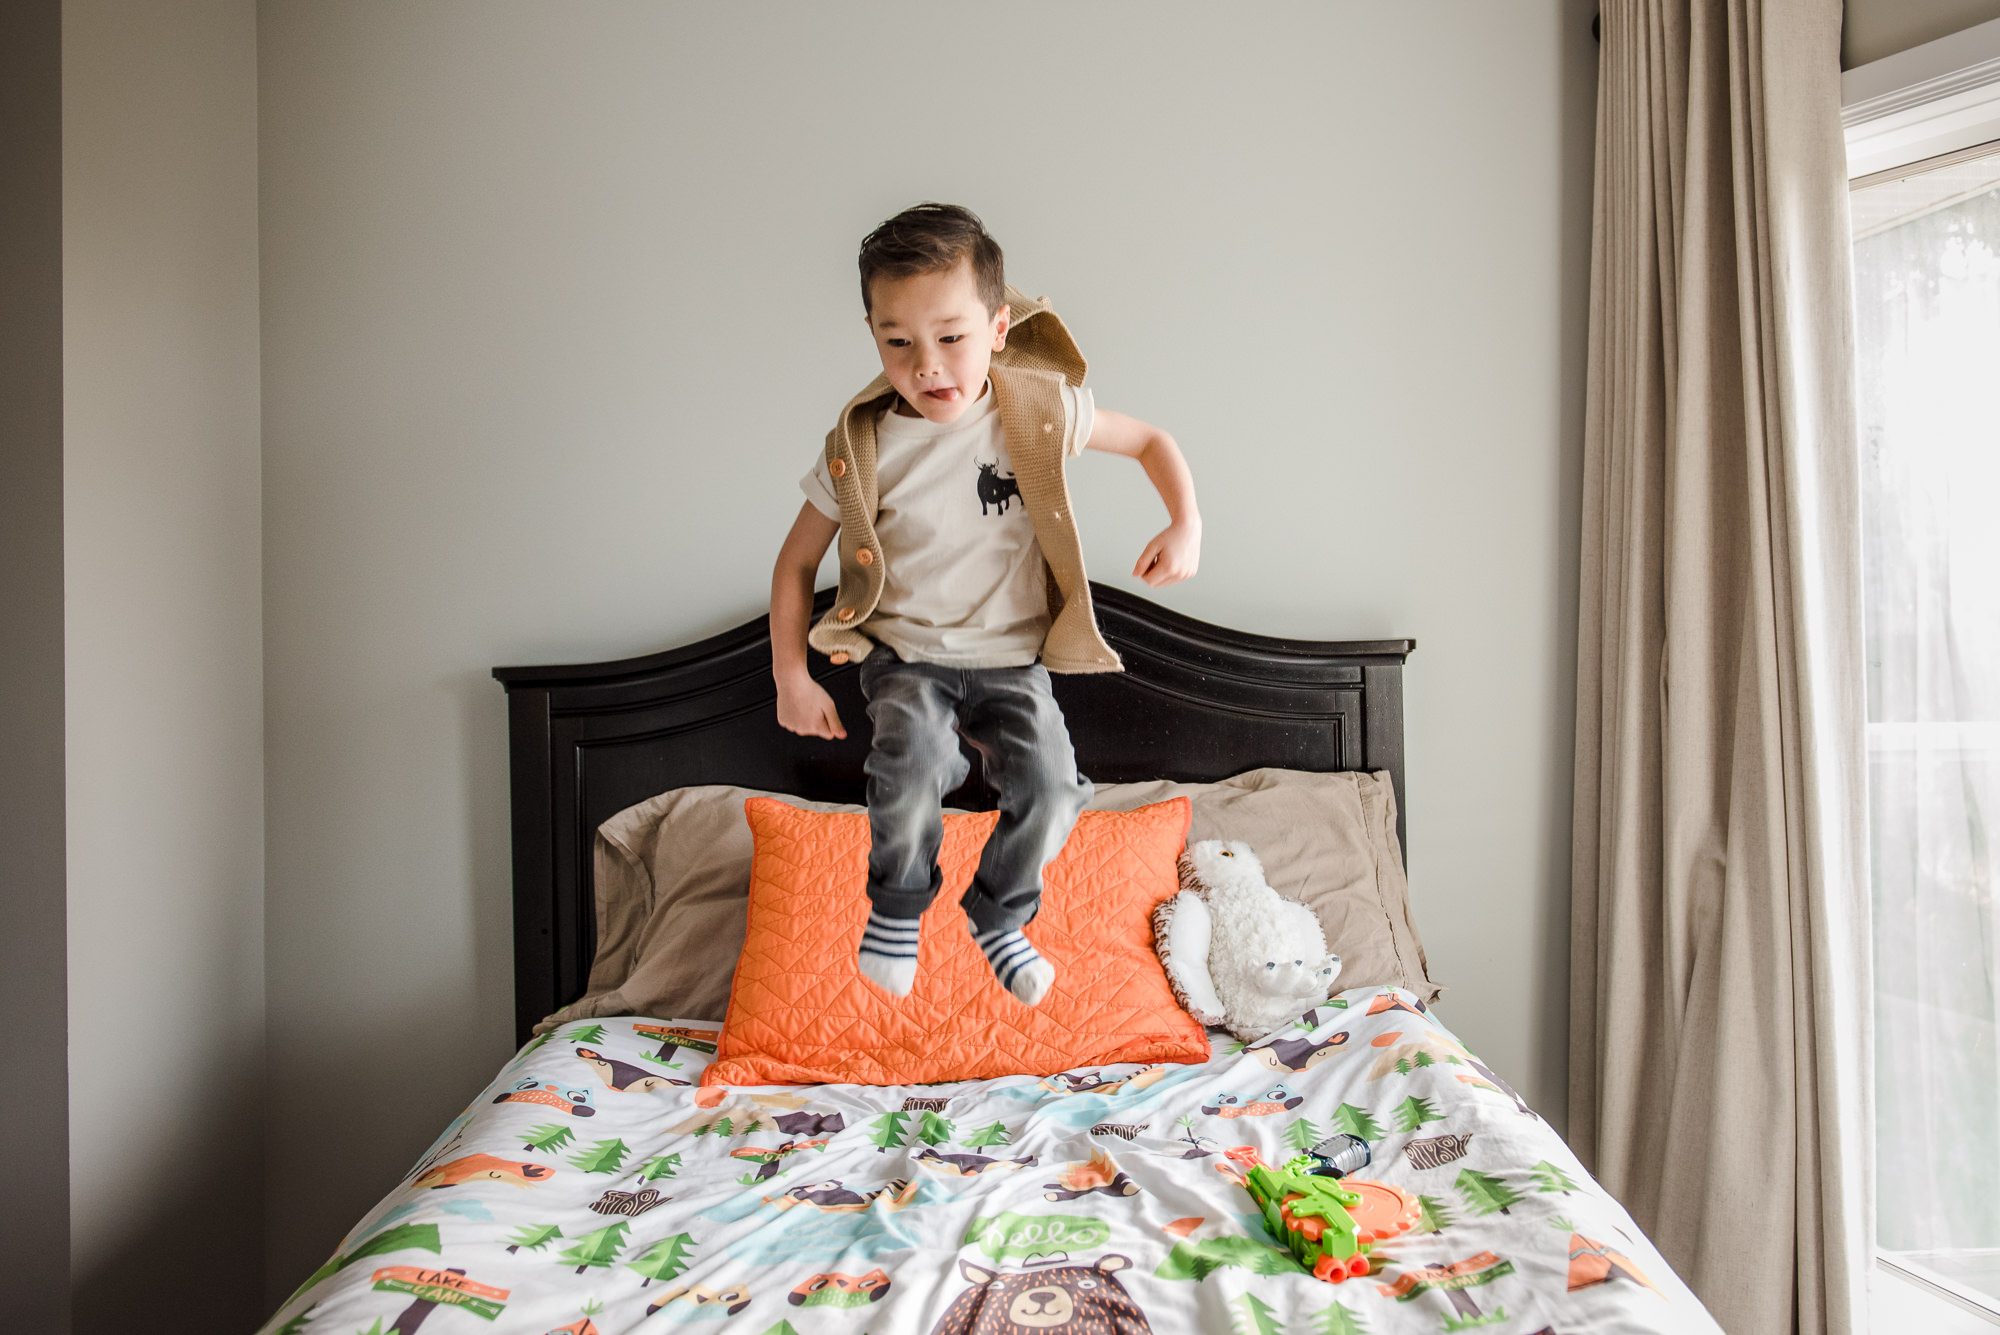 A boy jumps on a bed during edmonton family photography